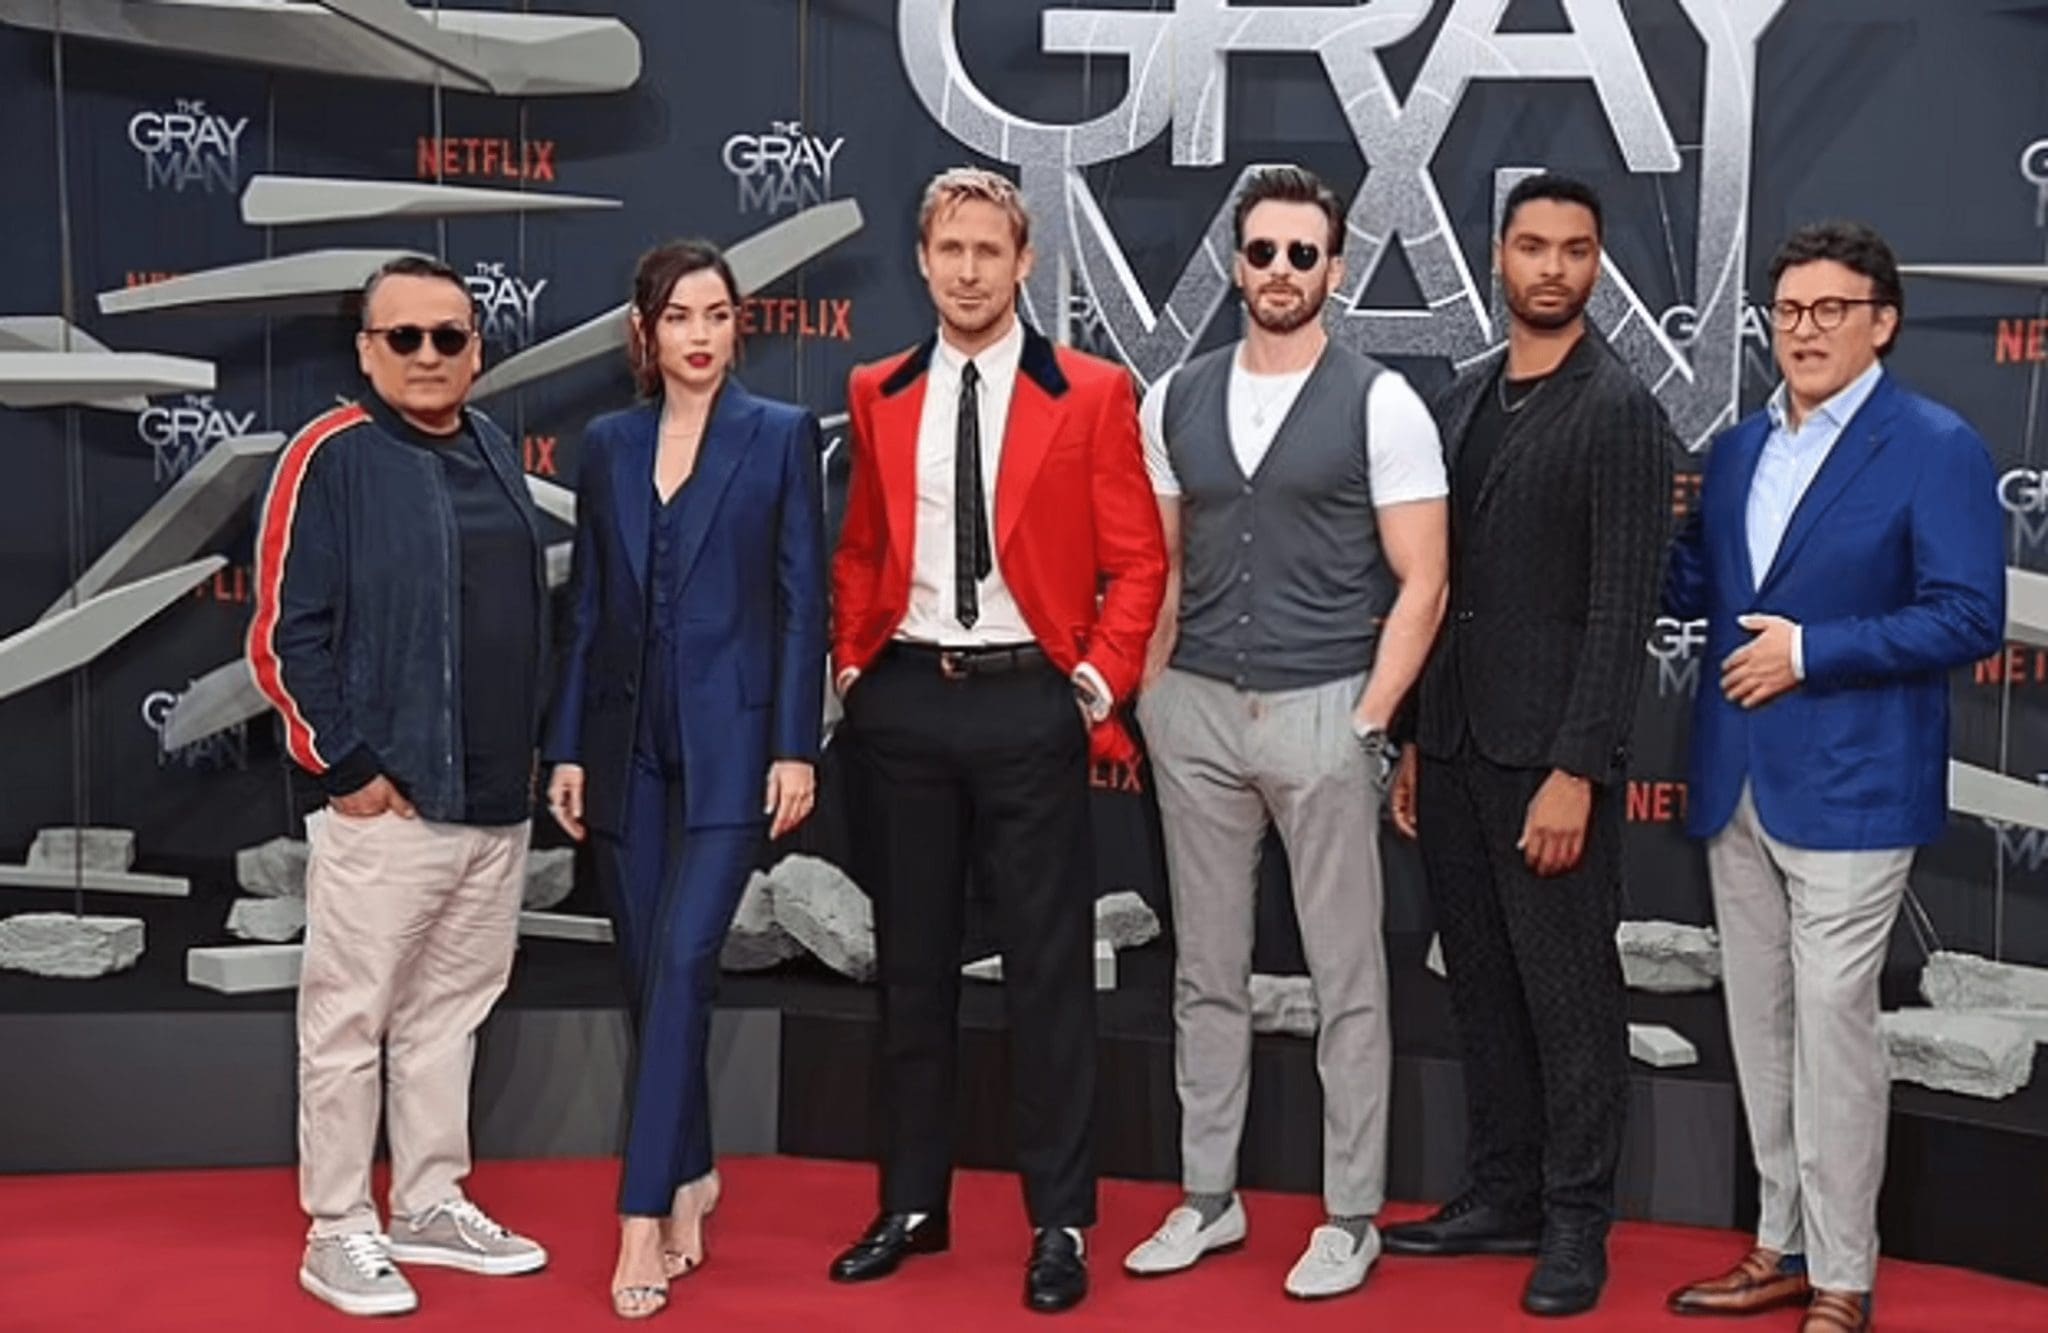 The Launch Of Netflix's Most Costly Action Film The Gray Man Featured Ryan Gosling Wearing A Red Jacket, Chris Evans, And Ana De Armas